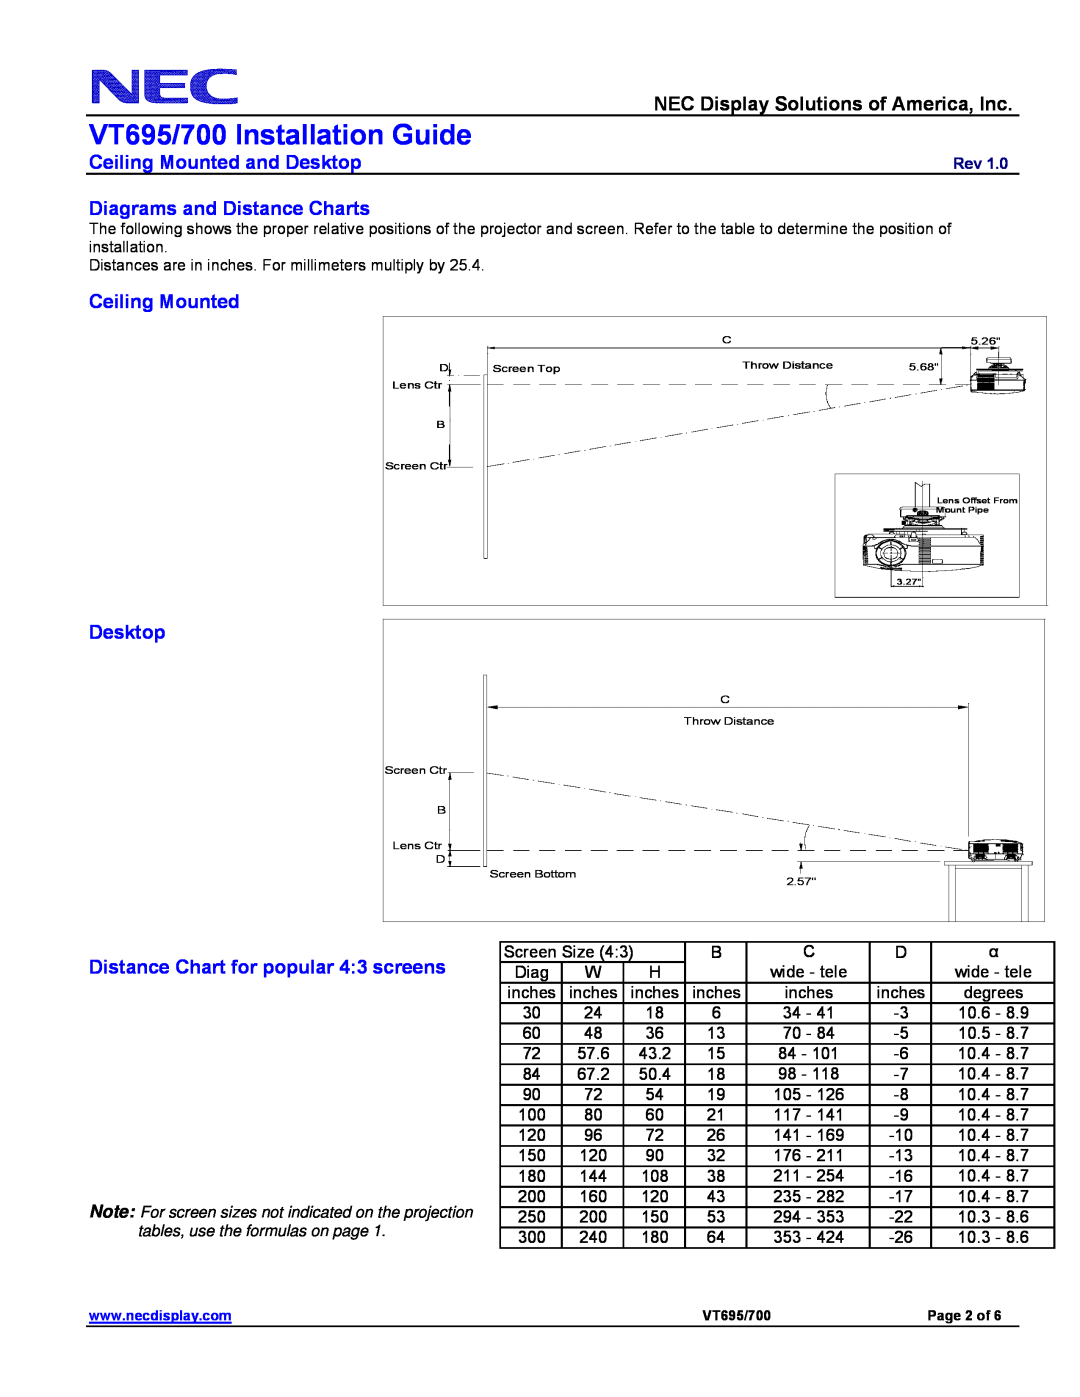 NEC VT695/700 specifications NEC Display Solutions of America, Inc, Diagrams and Distance Charts, Ceiling Mounted Desktop 